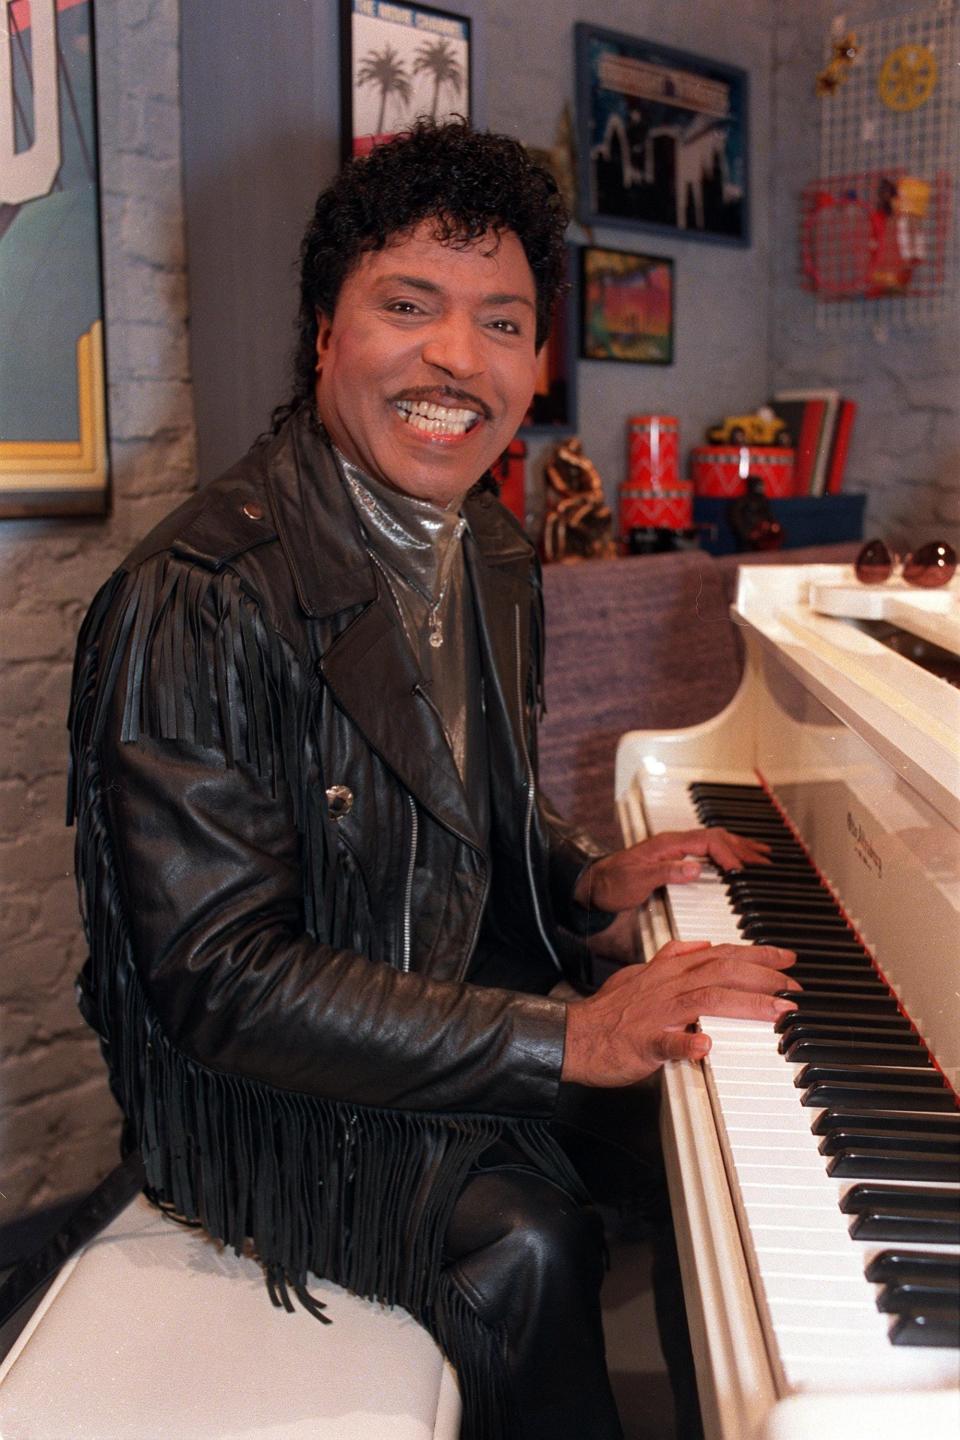 Little Richard, shown in this 1988 photo, was an early pioneer of rock ’n’ roll. Bob Dylan says his song "Tutti Frutti" was an "alarm" signaling that everything was about to change in society.